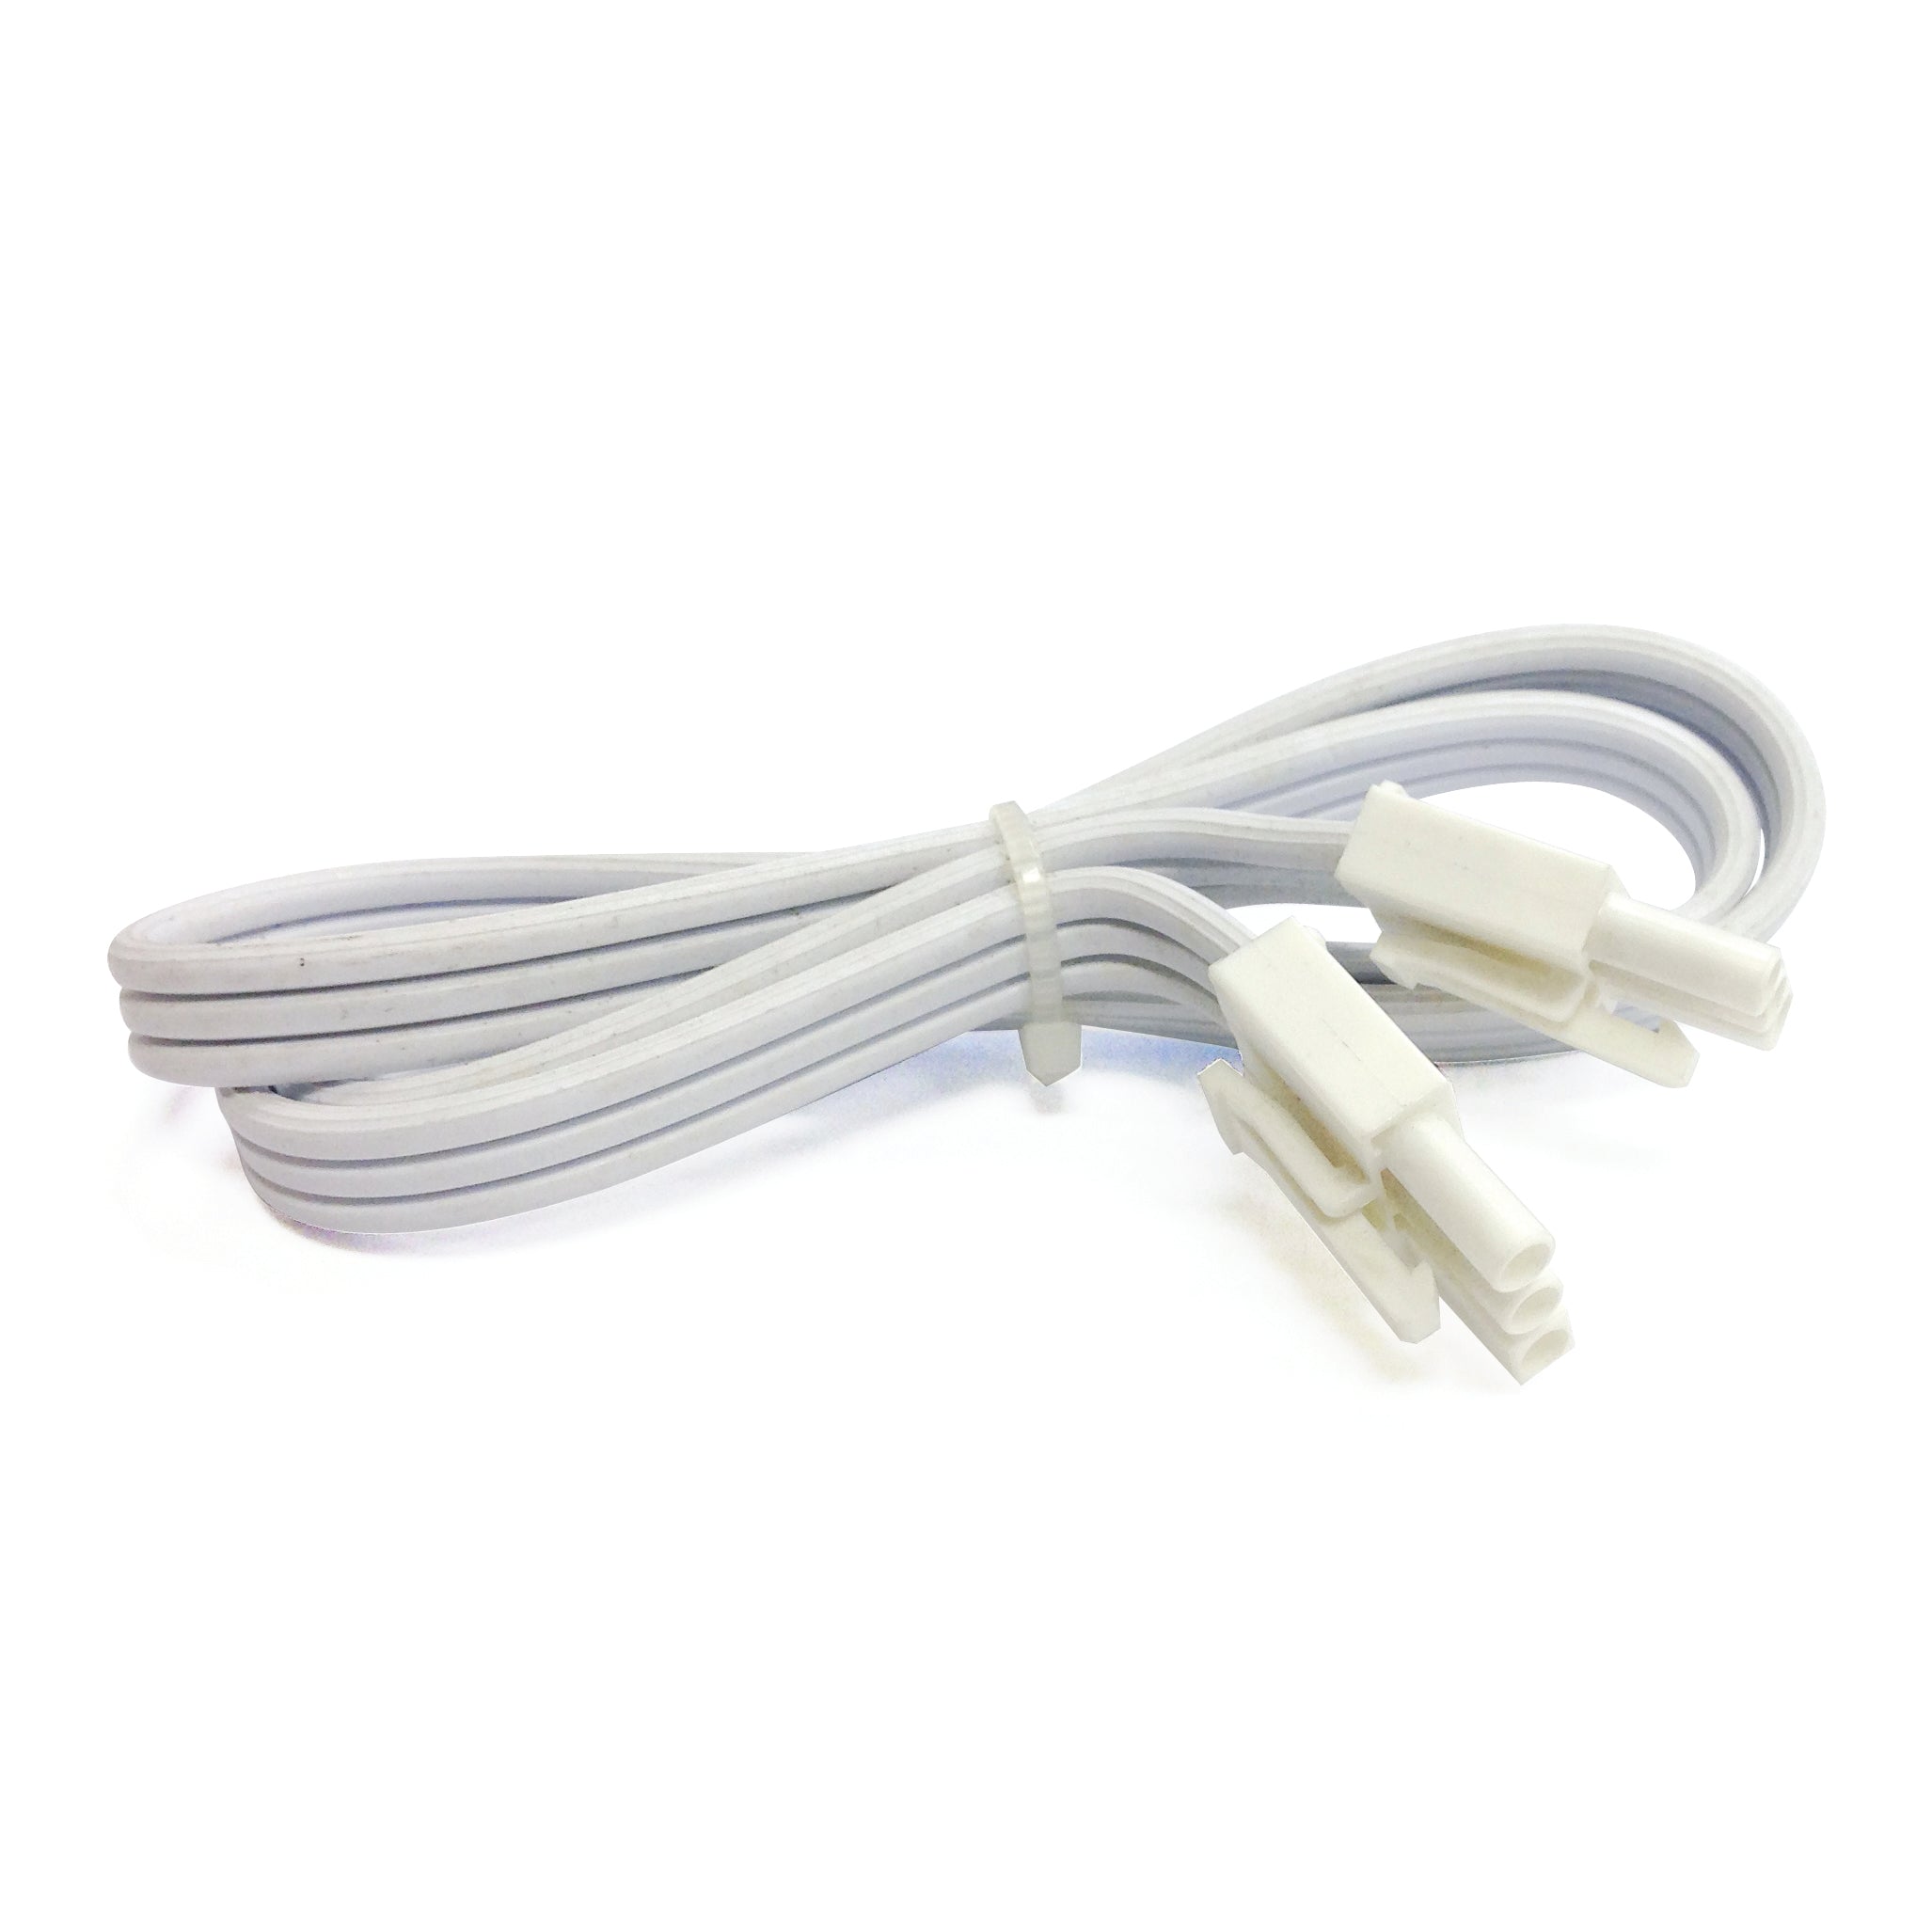 Nora Lighting NUA-872W - Accent / Undercabinet - 72 Inch LEDUR Interconnect Cable, White